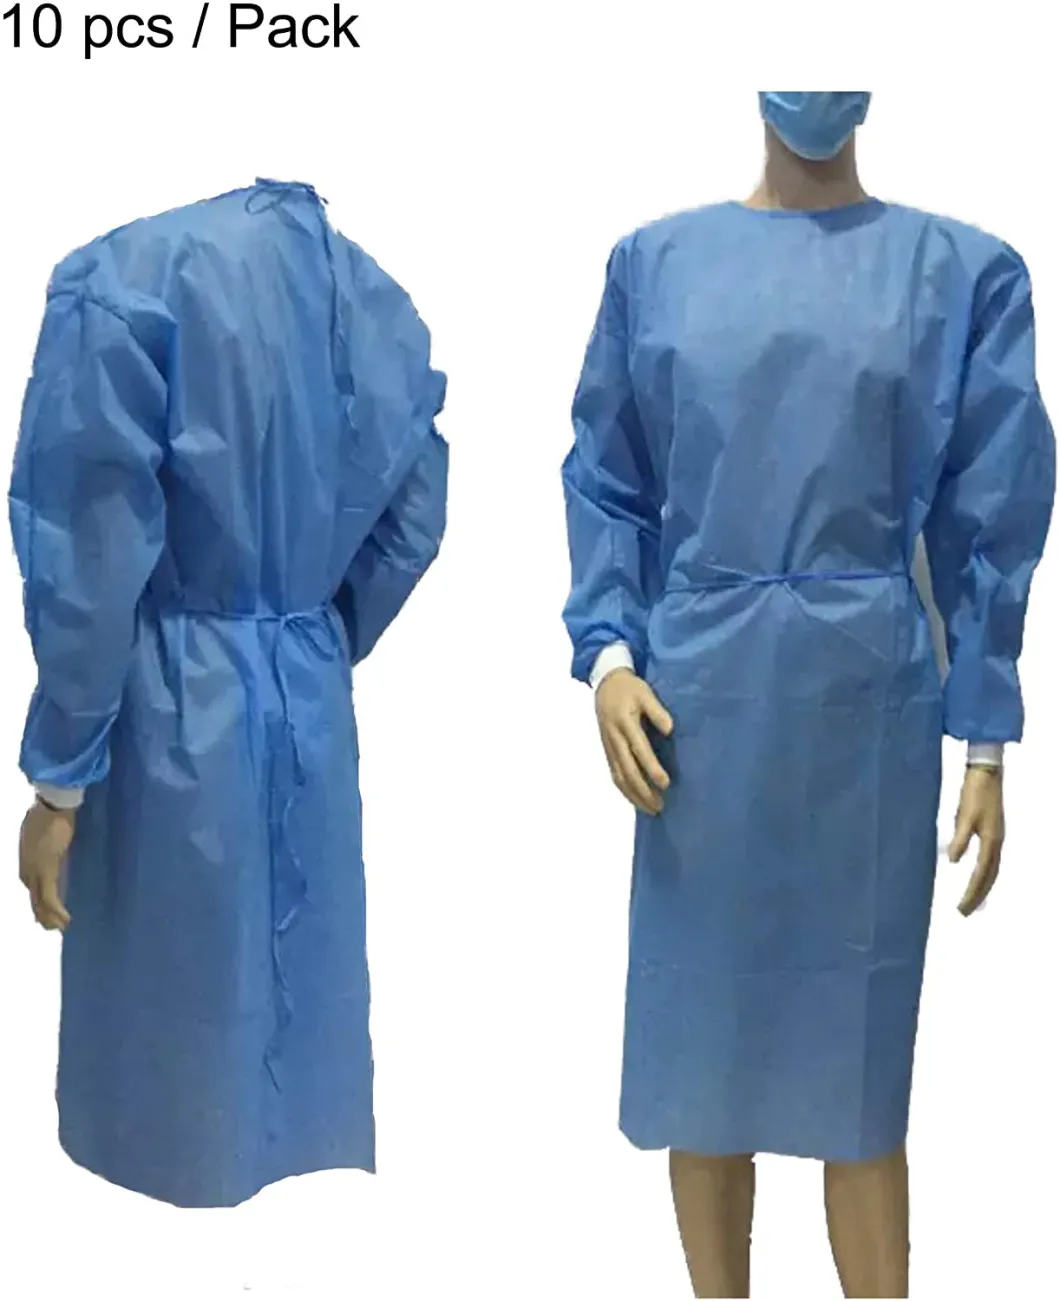 Non-Woven Reinforced Disposable Medical Isolation Gown